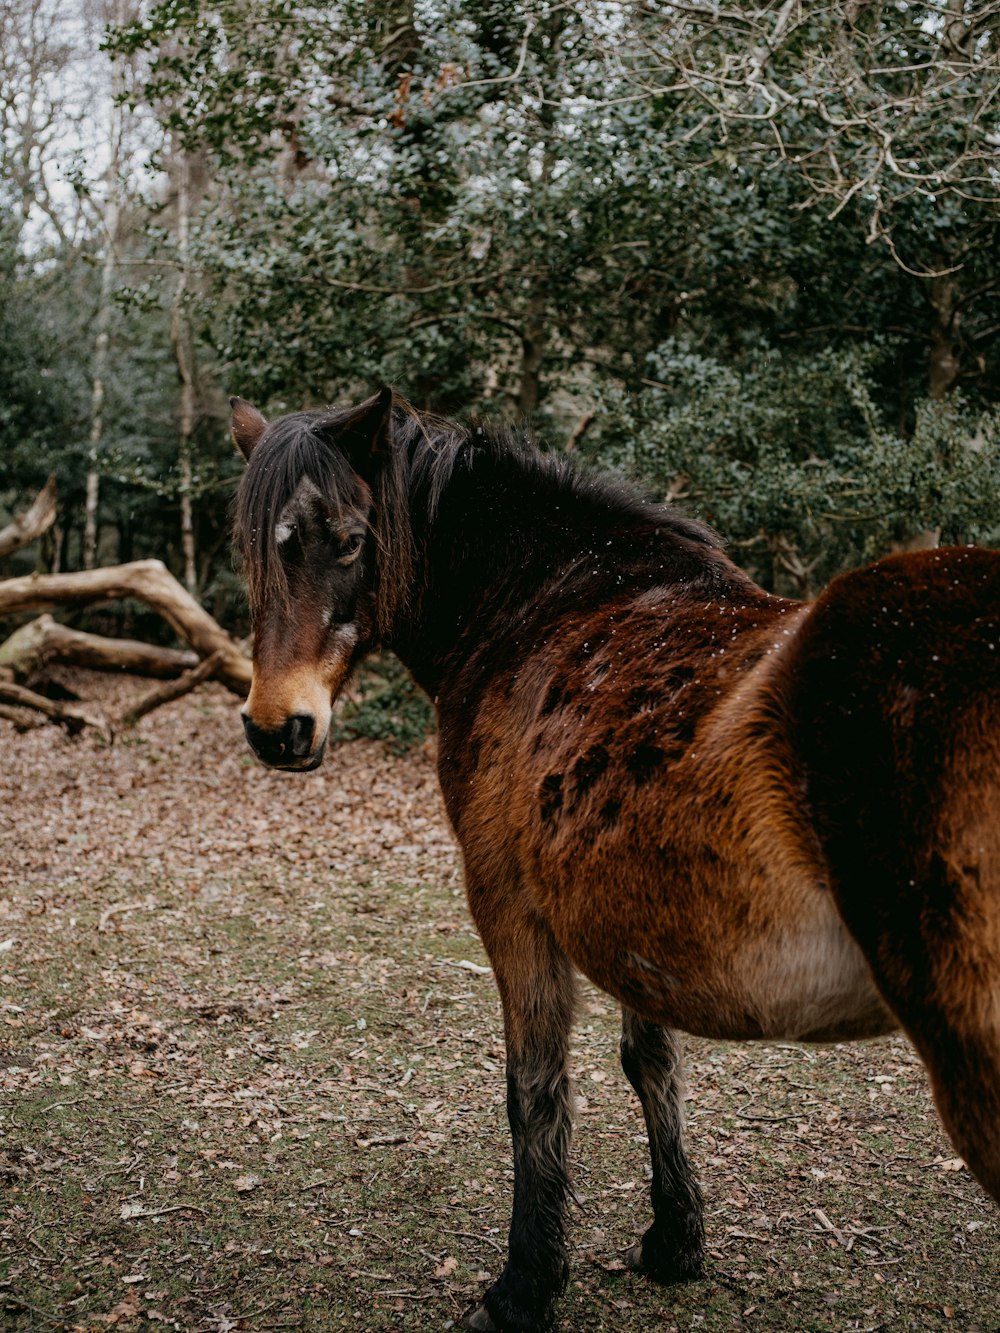 brown and black horse standing on ground during daytime